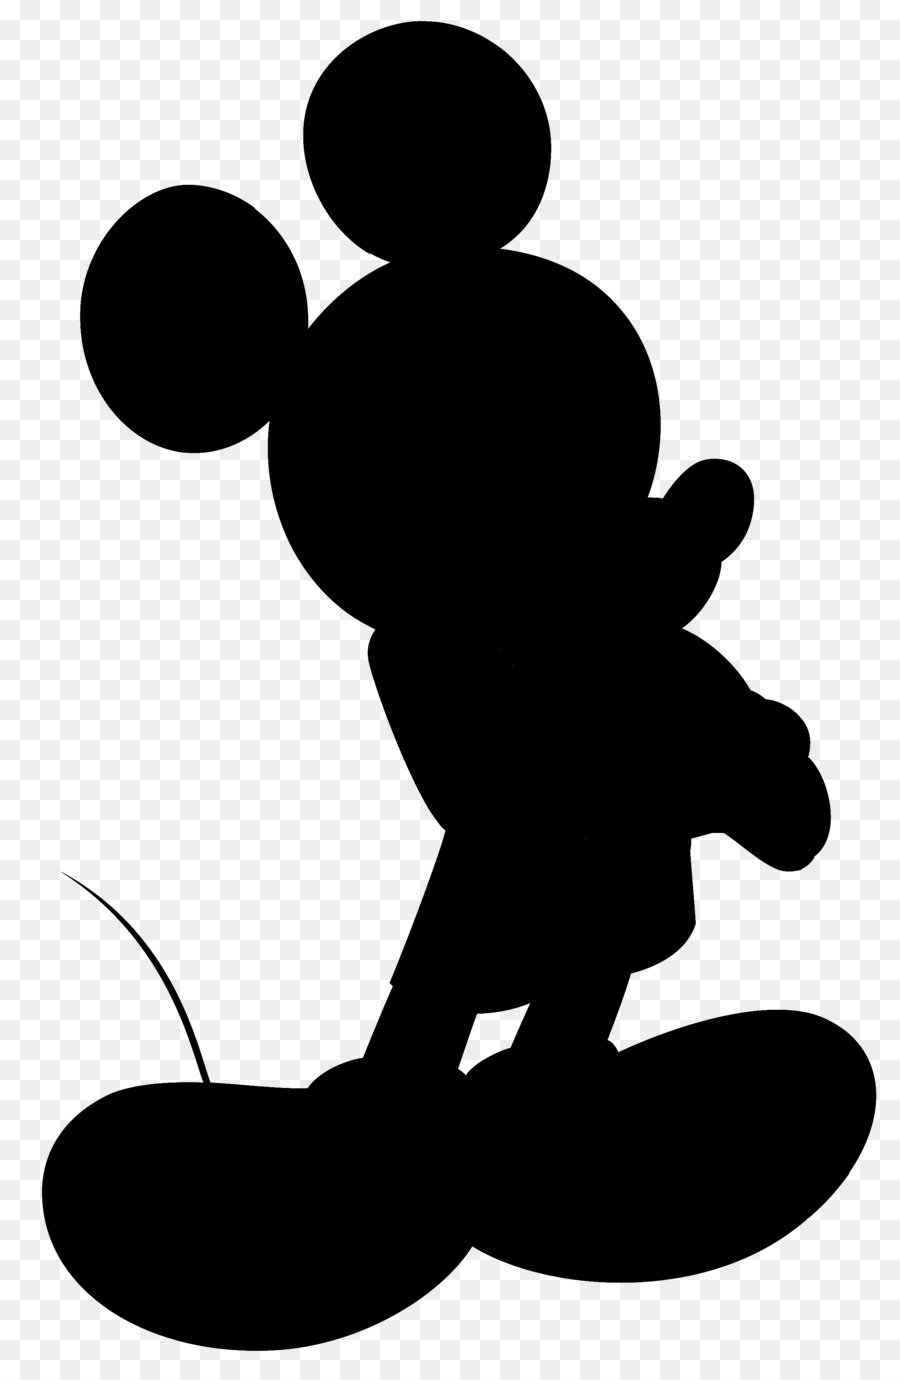 Mickey Mouse Minnie Mouse The Walt Disney Company Logo Clip art - journals icon png download - 543*526 - Free Transparent Mickey Mouse png Download.